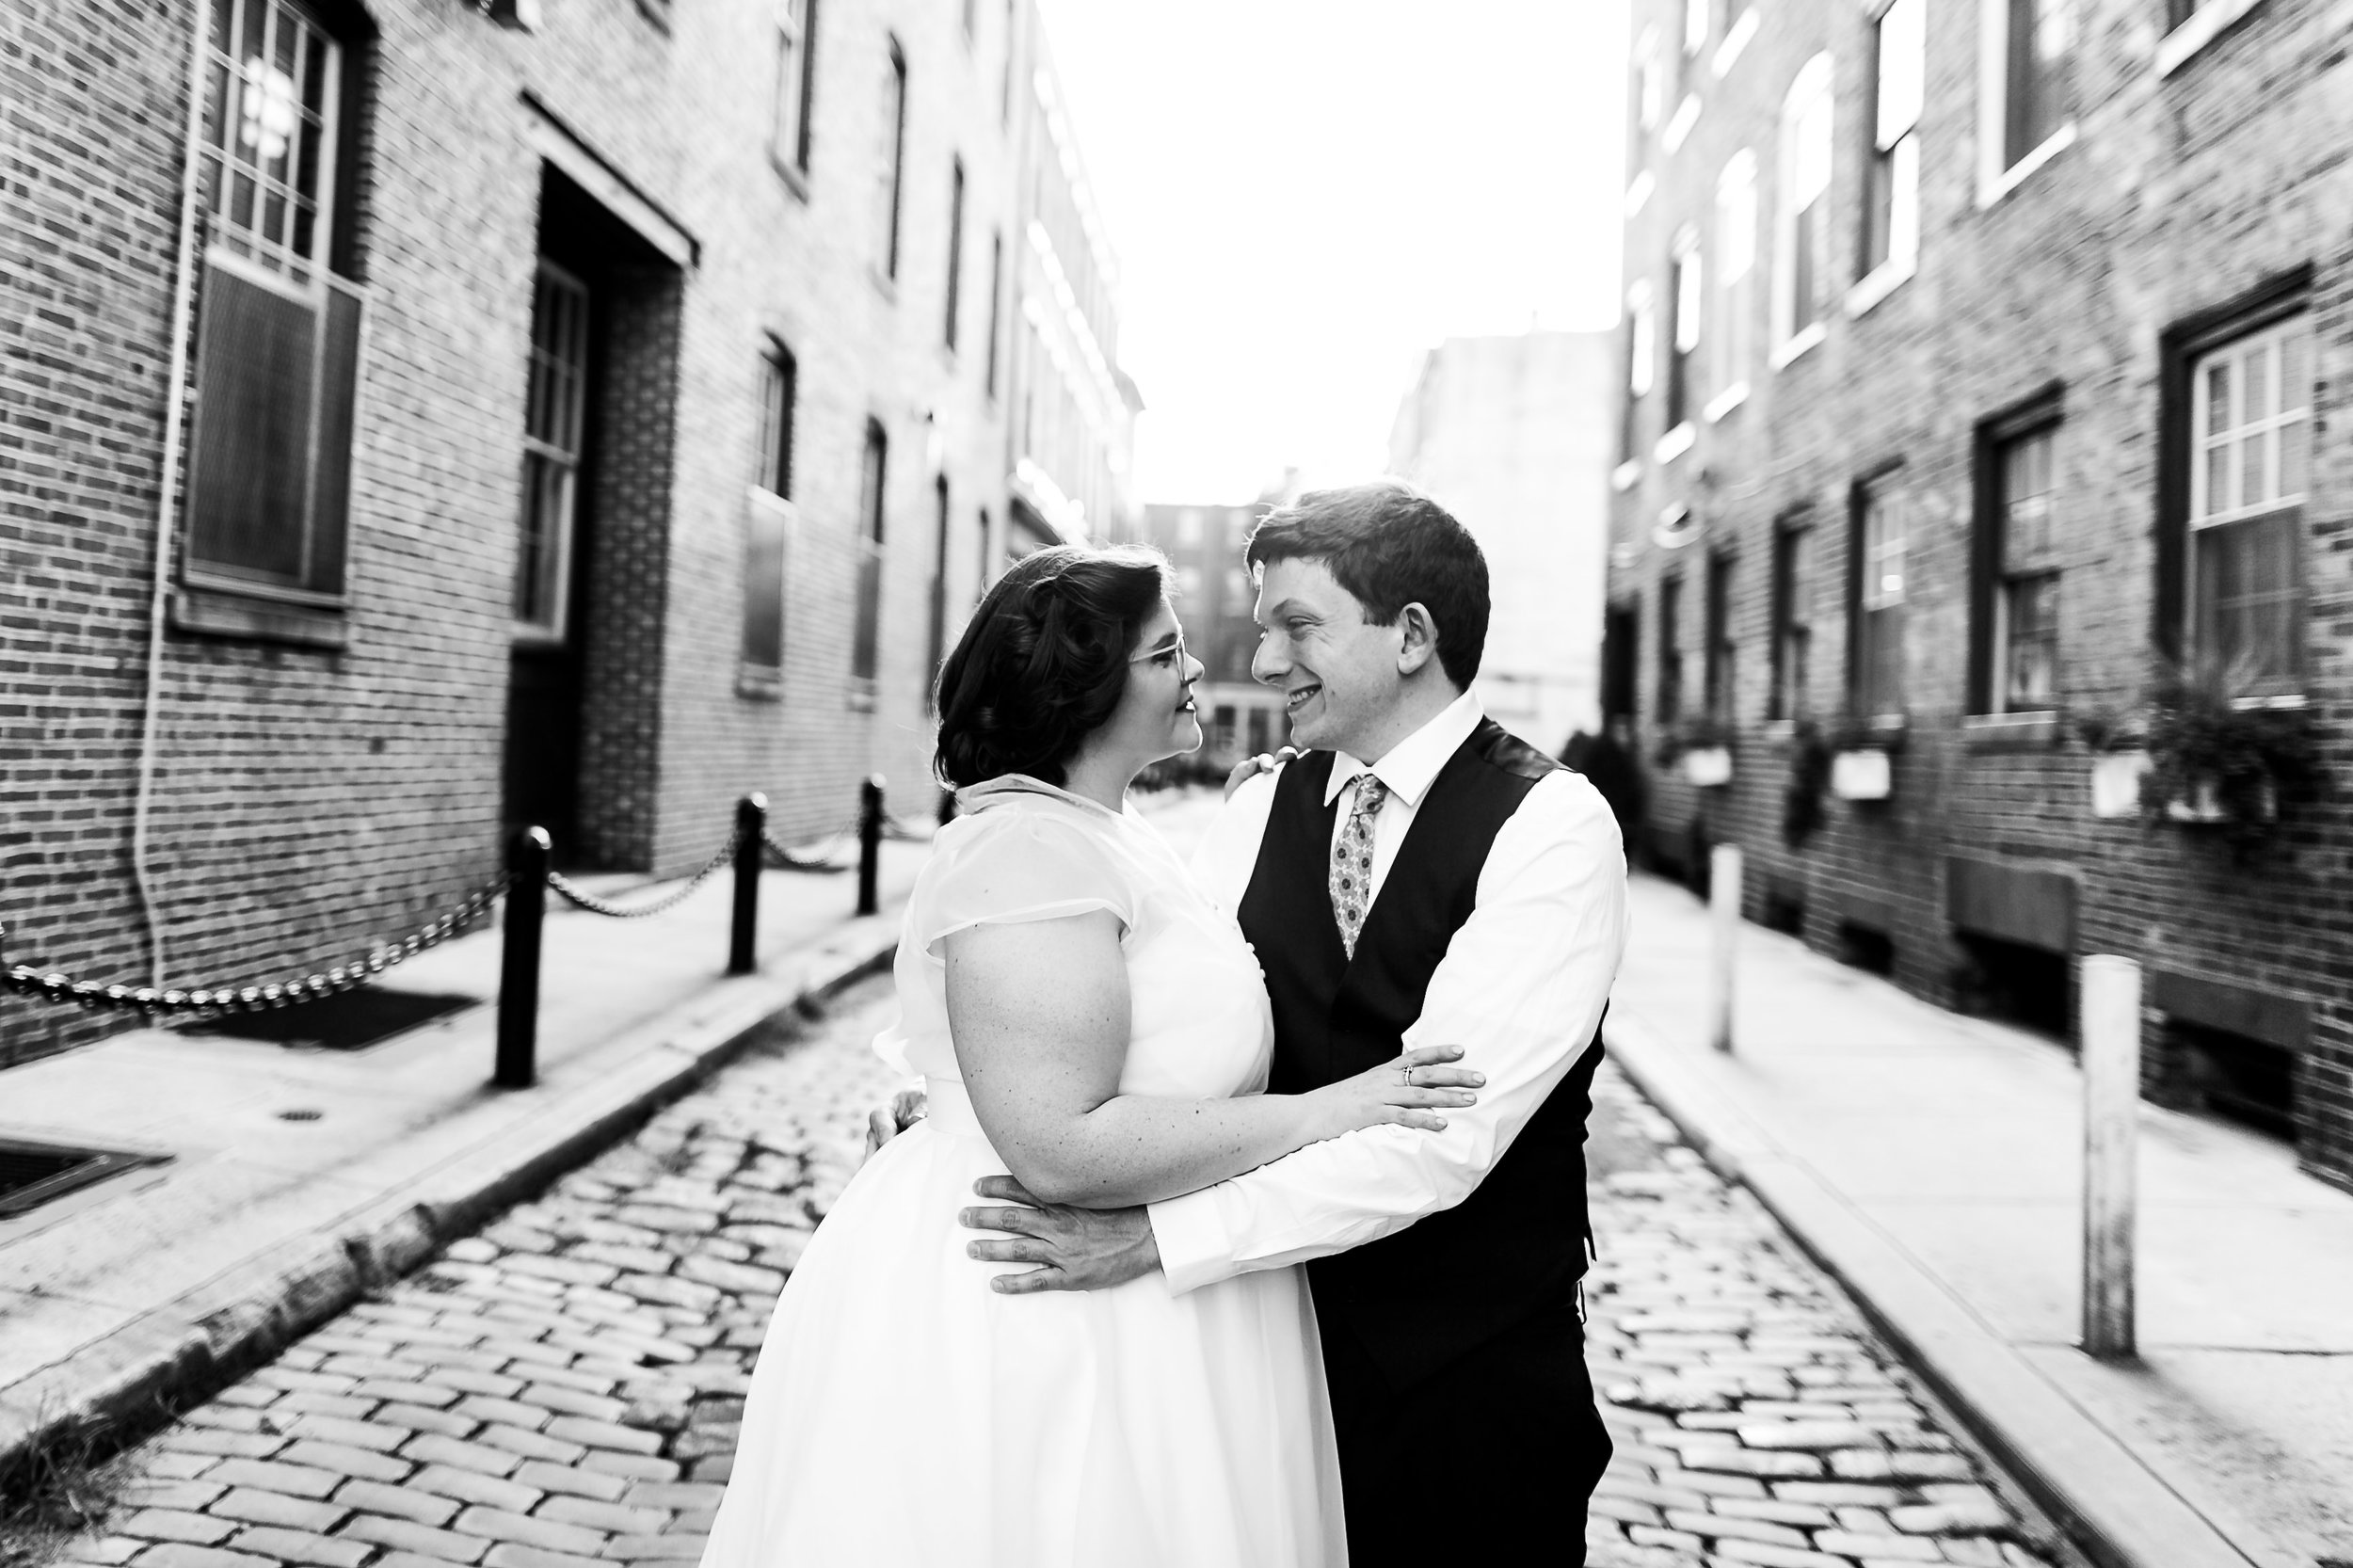 Cat and Doug Old City Philly Engagement Shoot-6.jpg